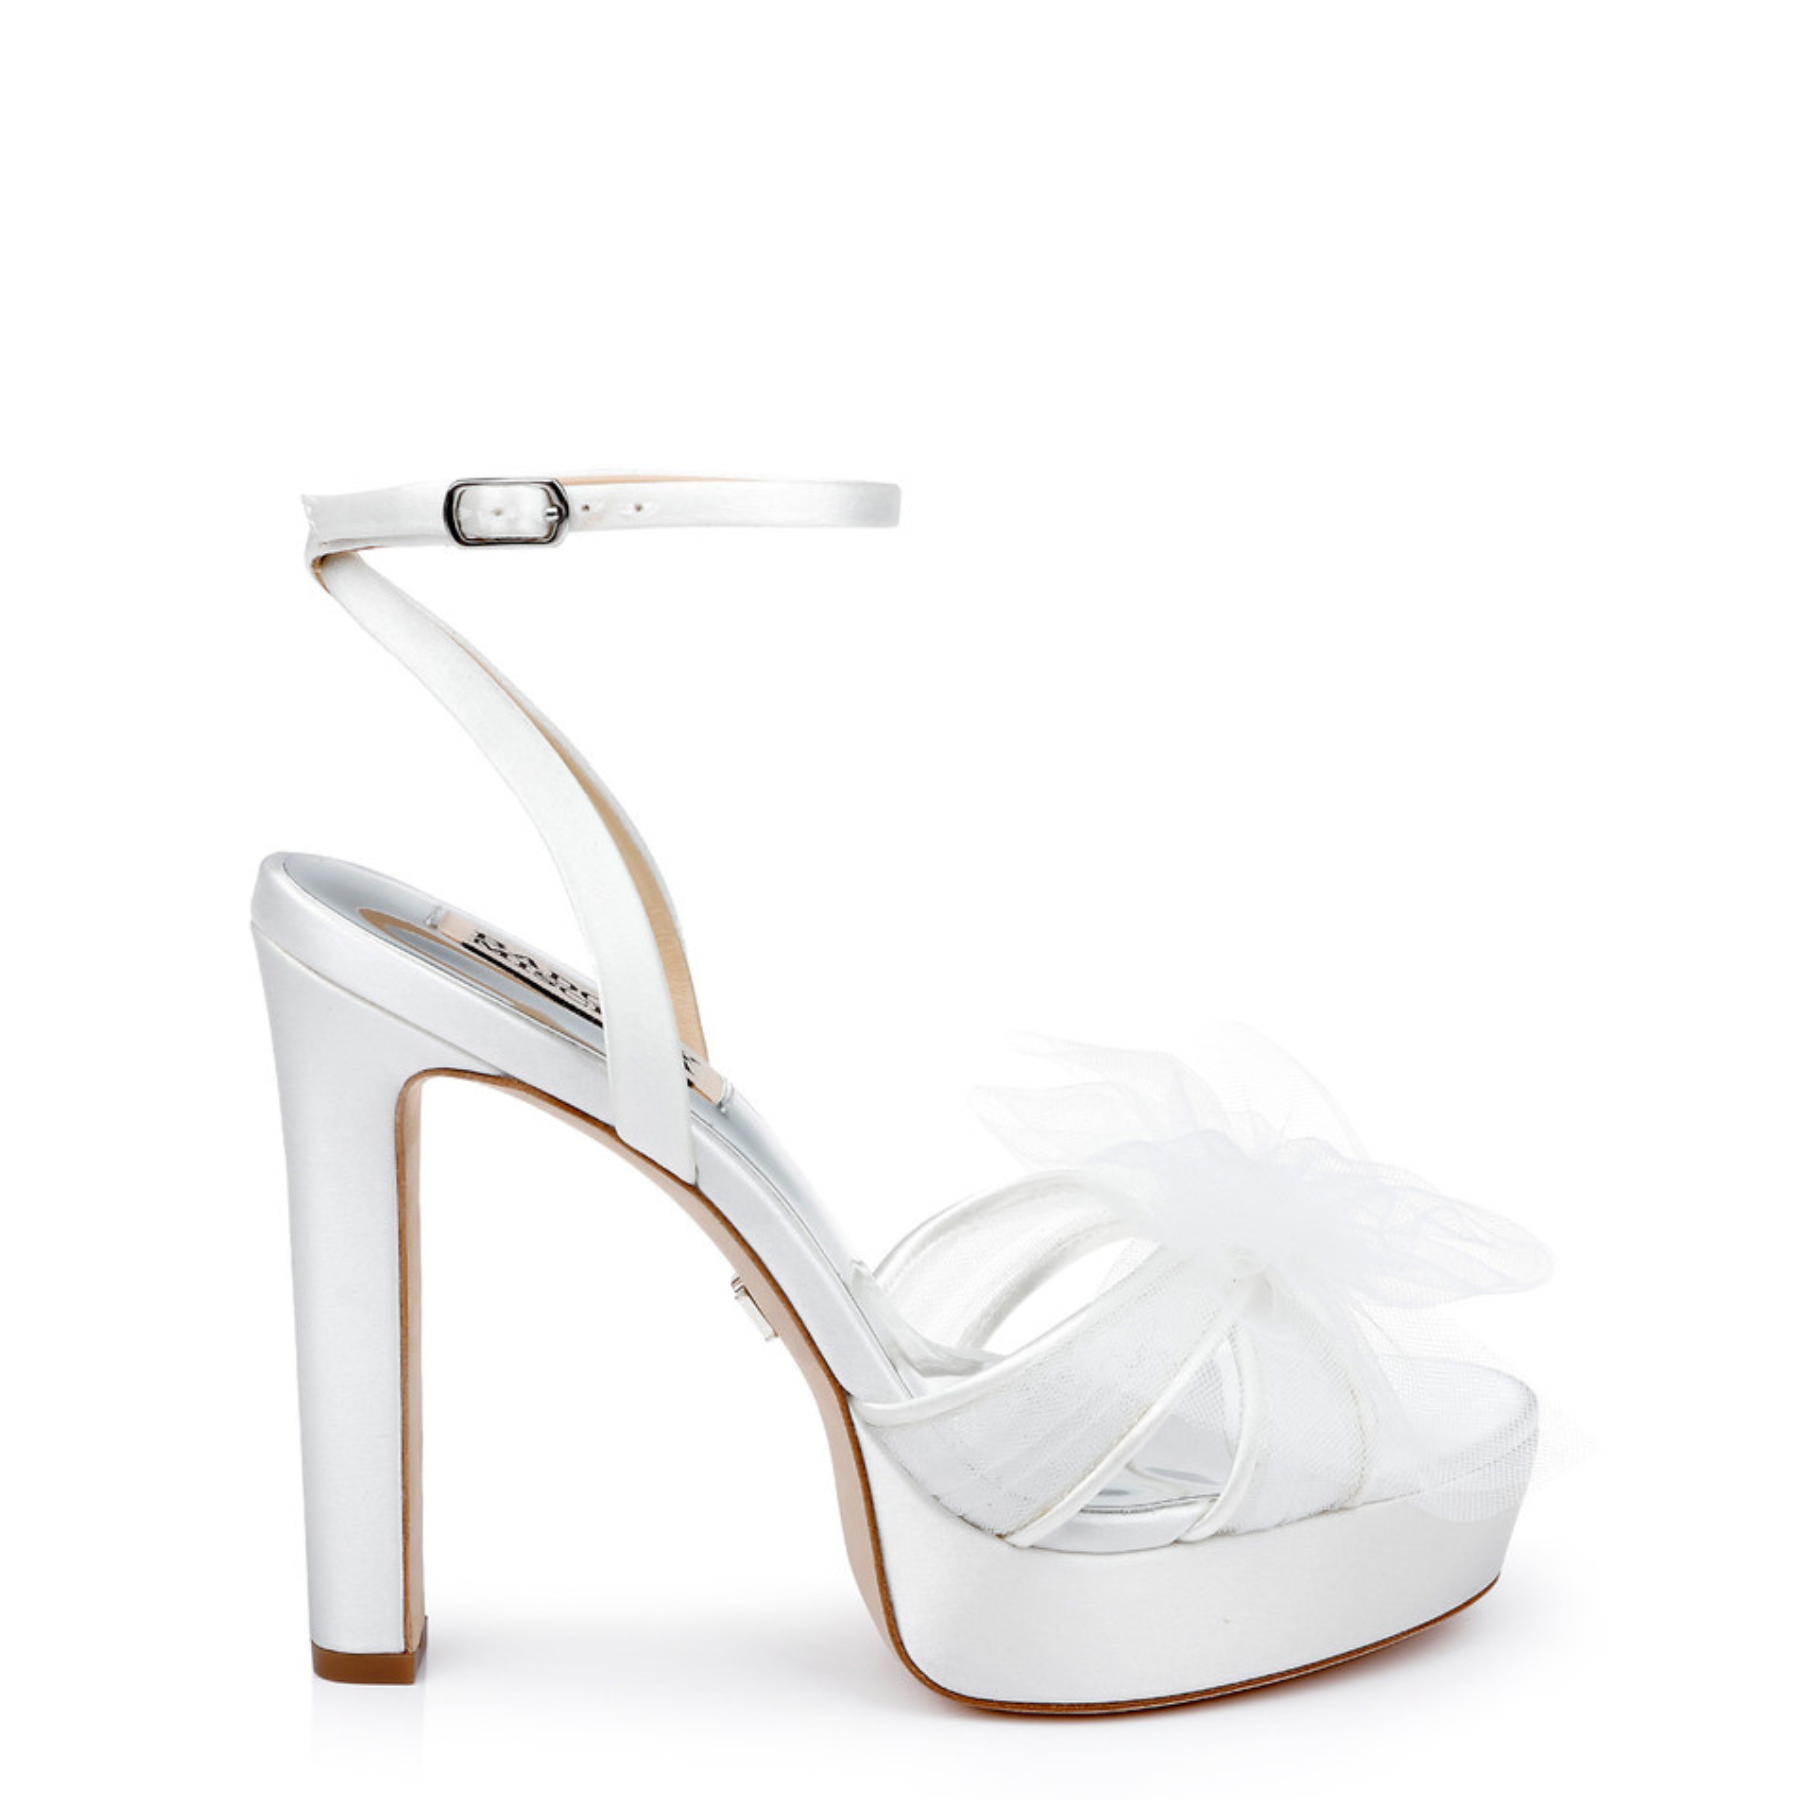 Buy Stylestry High Heels Solid Patent White Pumps for Women & Girls /UK3 at  Amazon.in